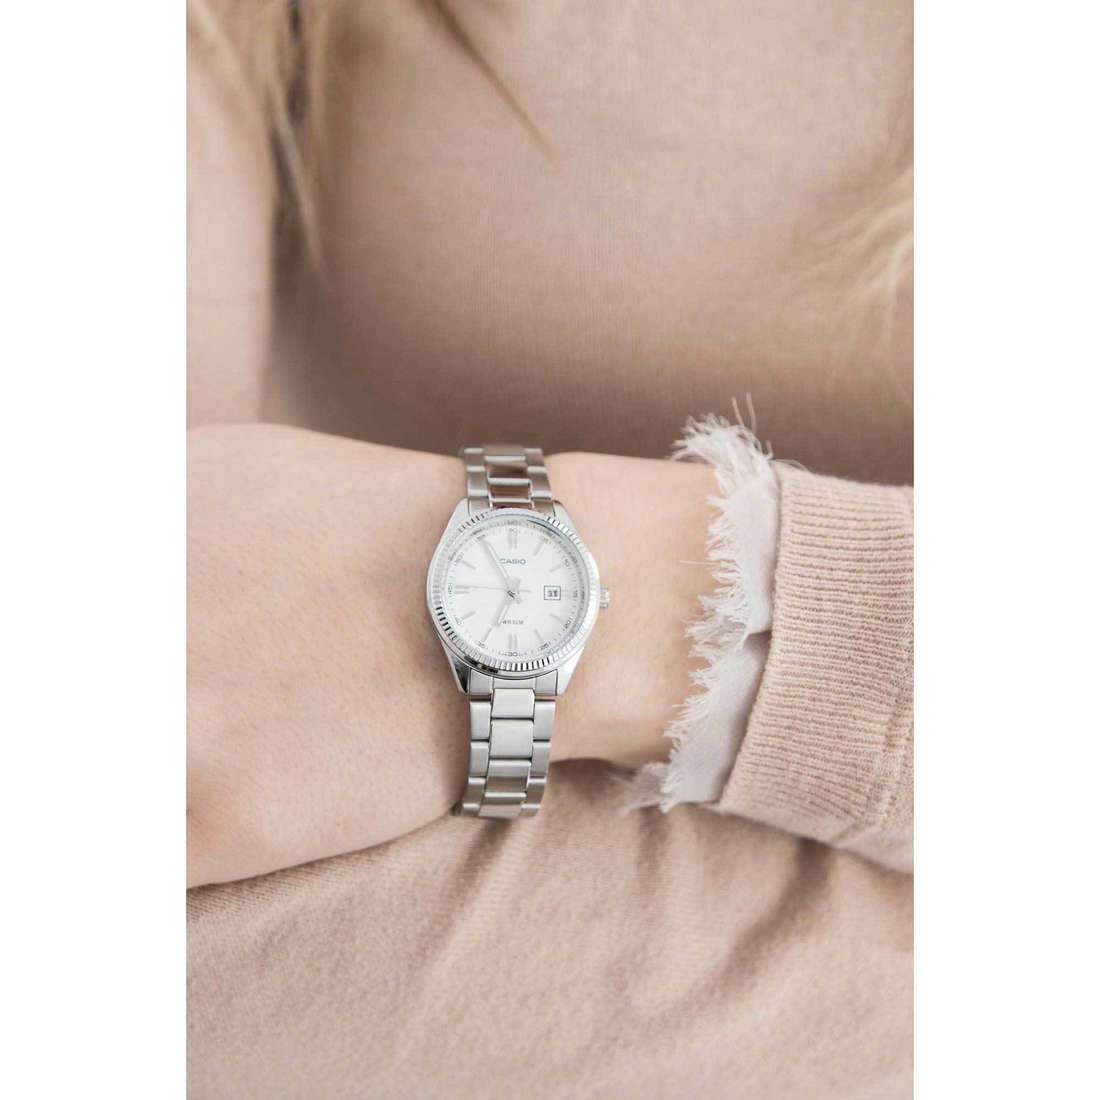 Casio only time Casio Collection woman LTP-1302PD-7A1VEG wearing